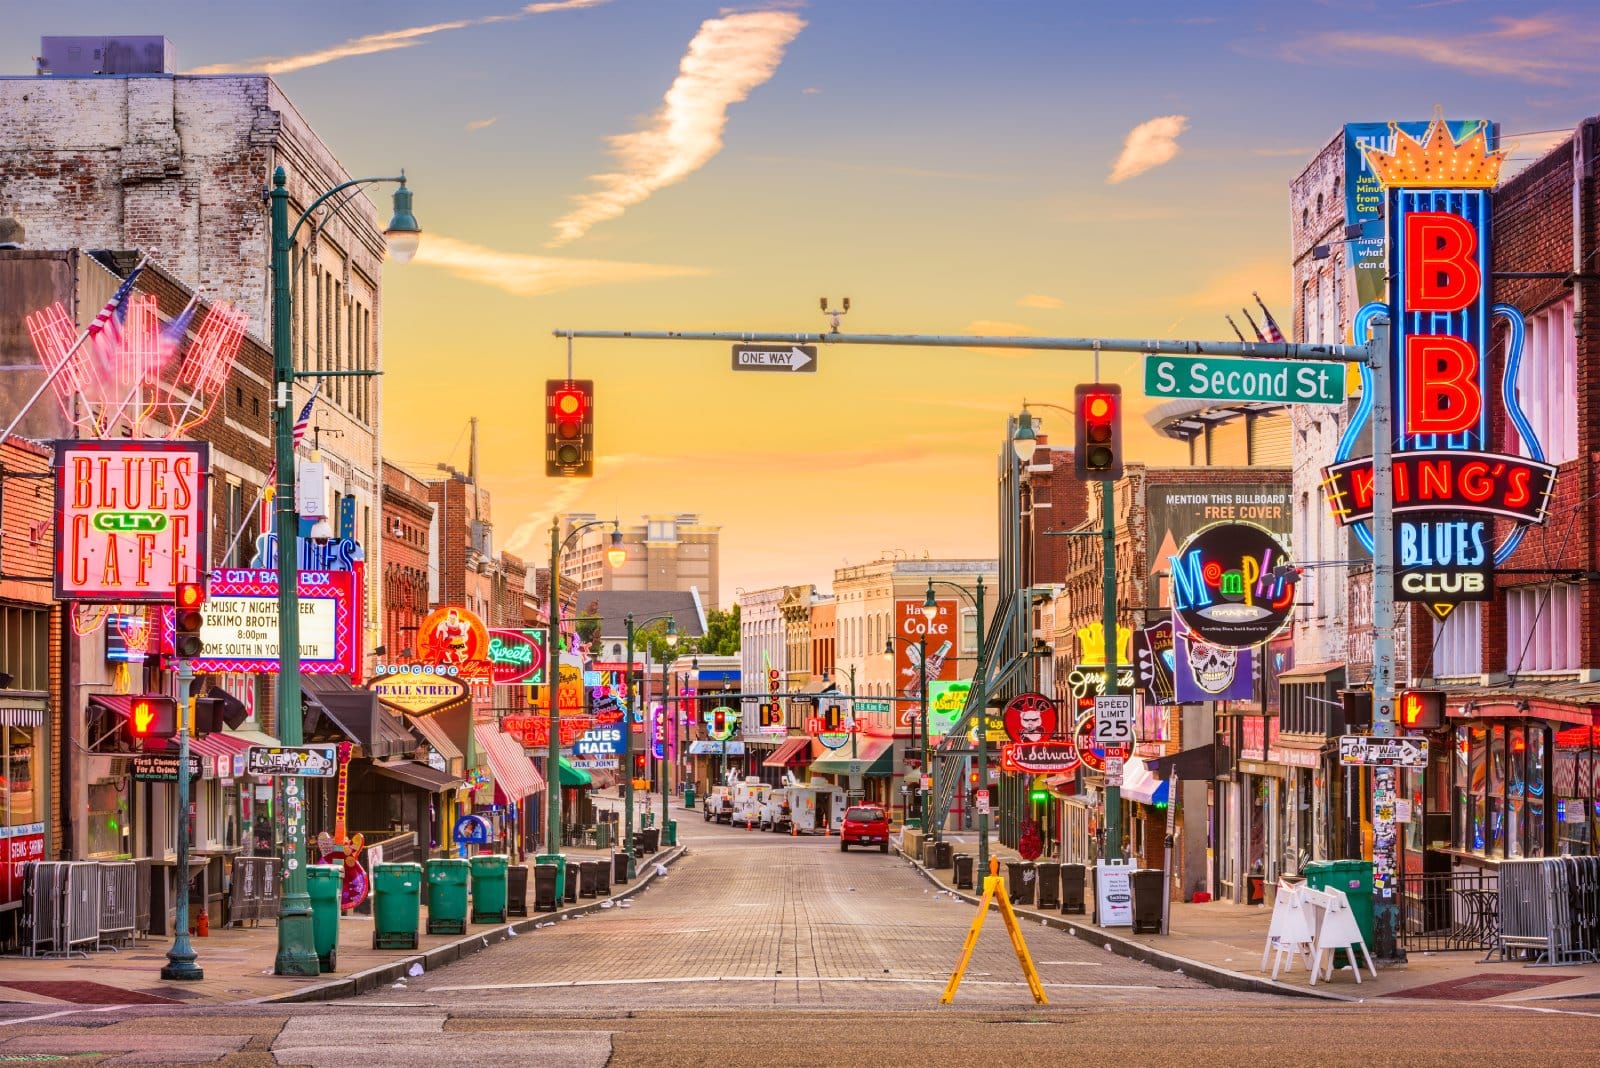 <p class="wp-caption-text">Image Credit: Shutterstock / Sean Pavone</p>  <p>Memphis beckons with the soulful strains of blues and the history of rock ‘n’ roll. However, it’s also grappling with violent crime and property crime rates. Visitors should enjoy the music but travel in groups and stay in well-lit areas at night.</p>